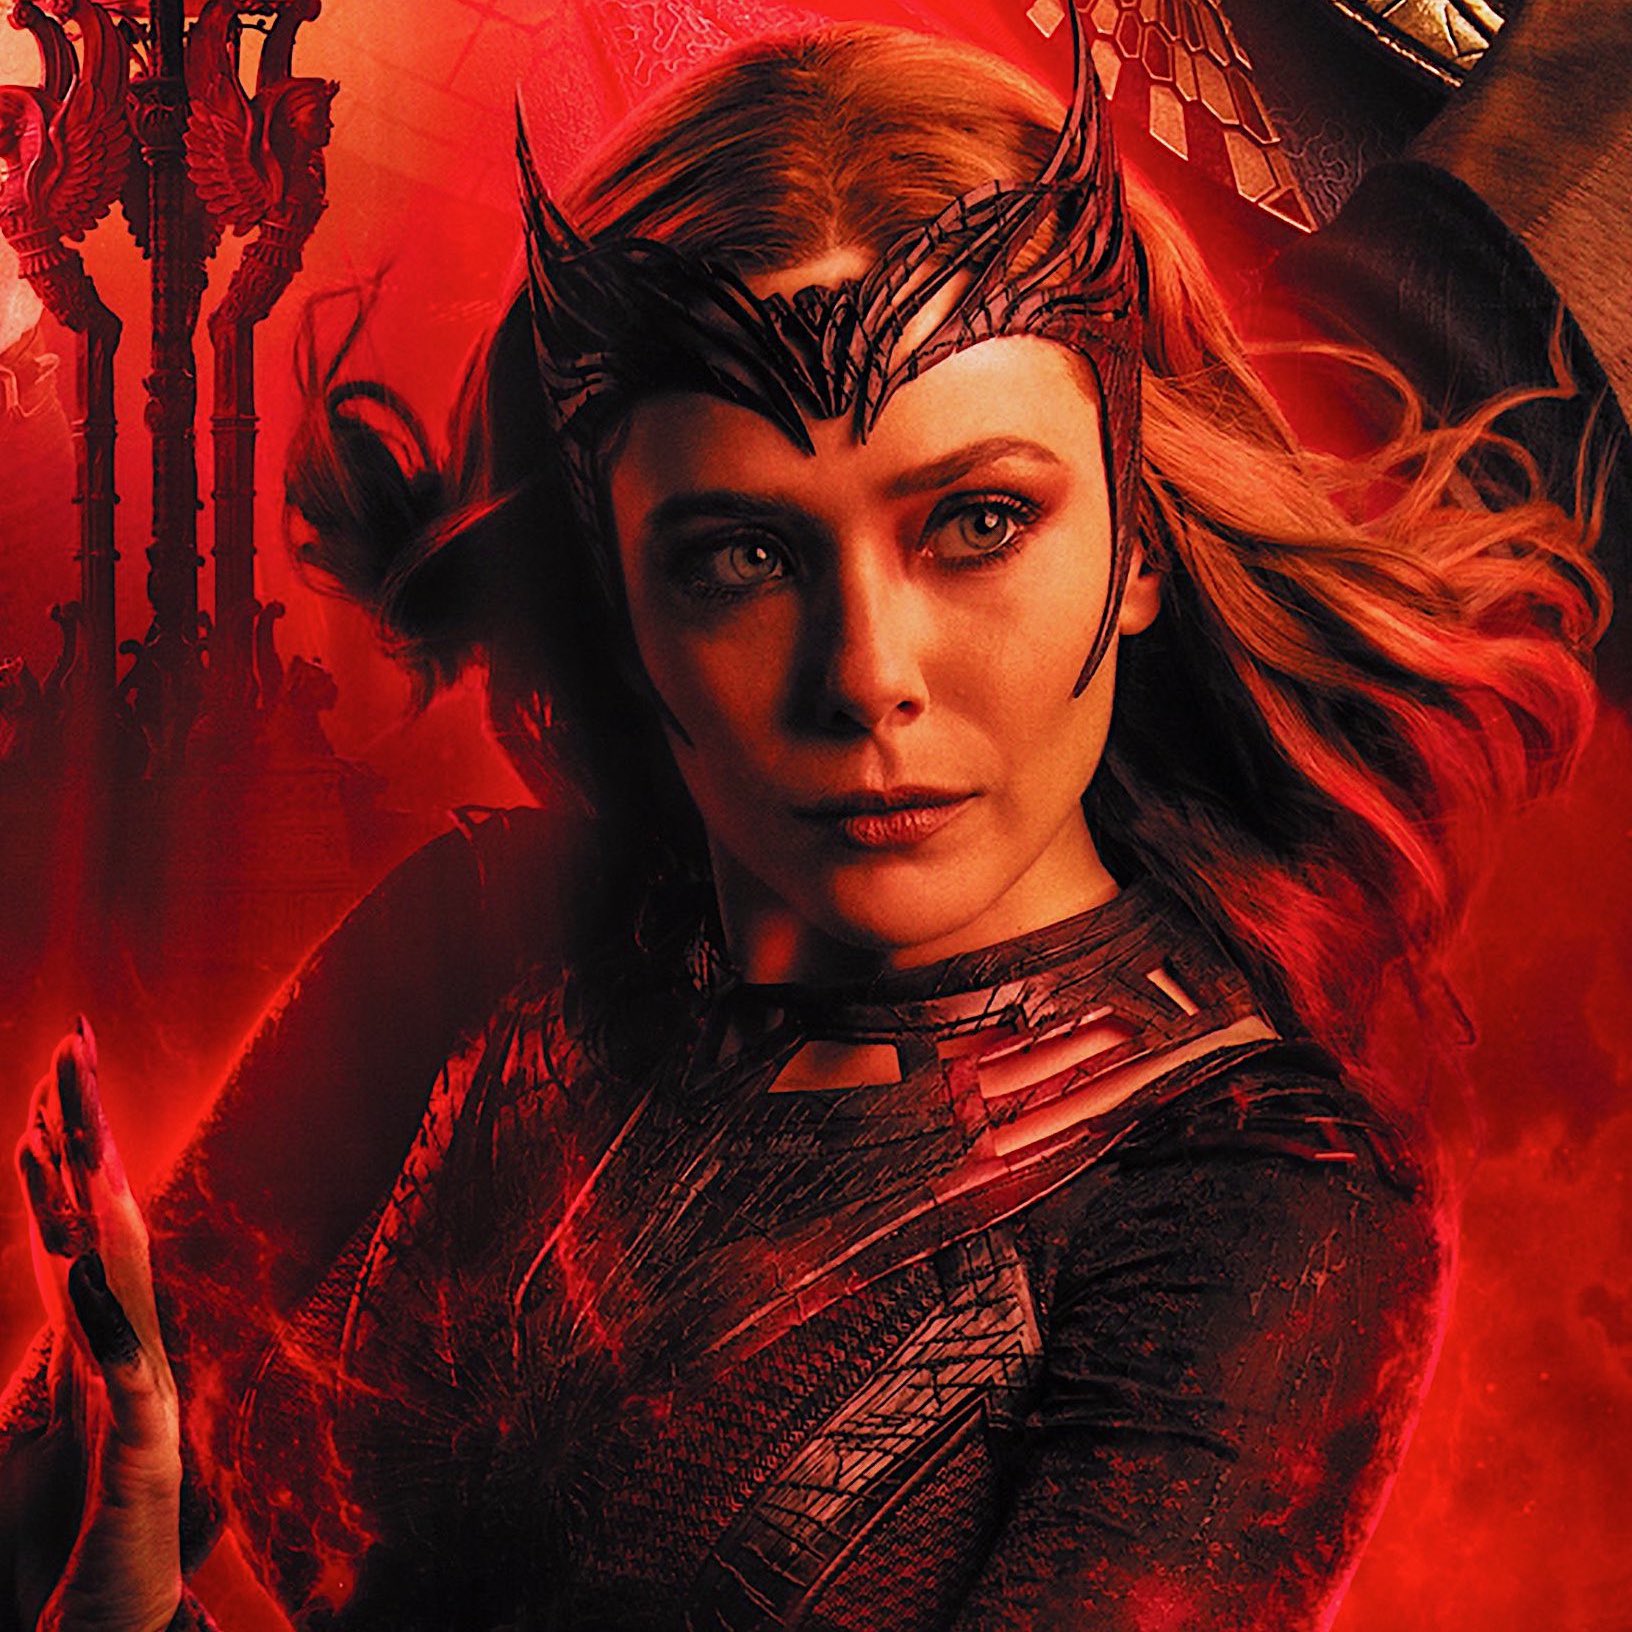 Scarlet Witch News: The #ScarletWitch “project” that was rumored a few months ago will reportedly be a solo movie. (via: MyTimeToShineH)